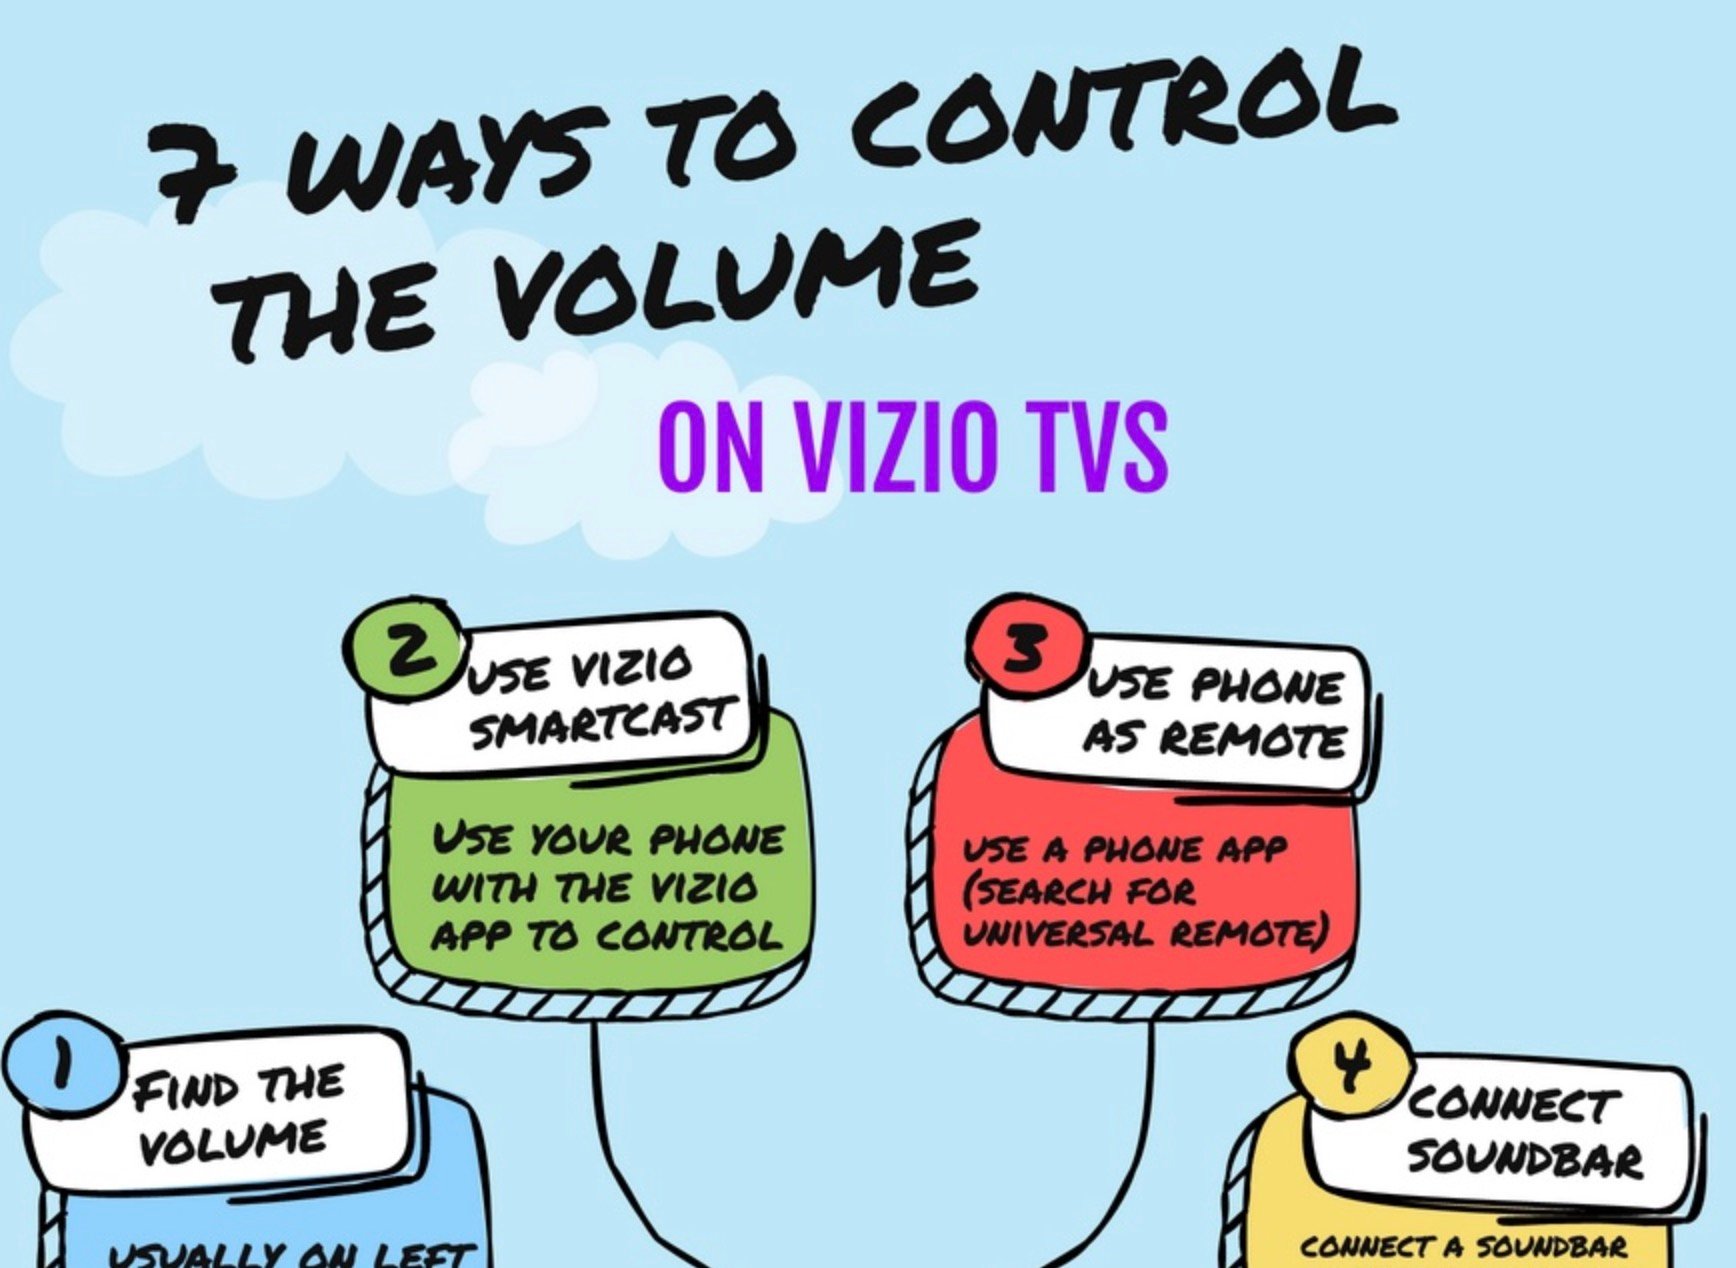 7 Ways to Turn up the Volume on Vizio TV without your Remote